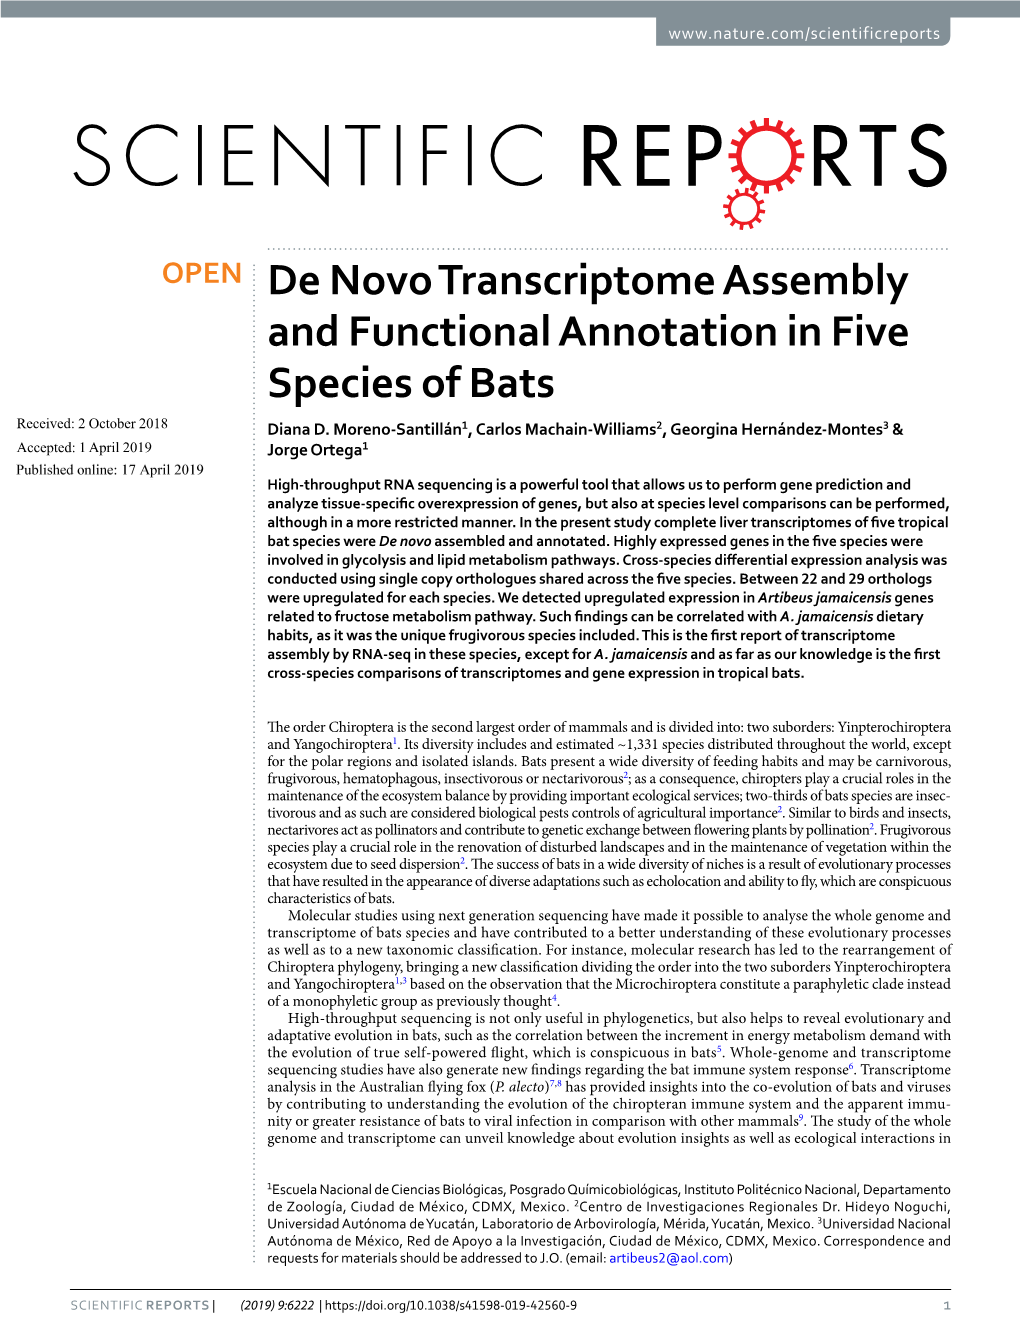 De Novo Transcriptome Assembly and Functional Annotation in Five Species of Bats Received: 2 October 2018 Diana D